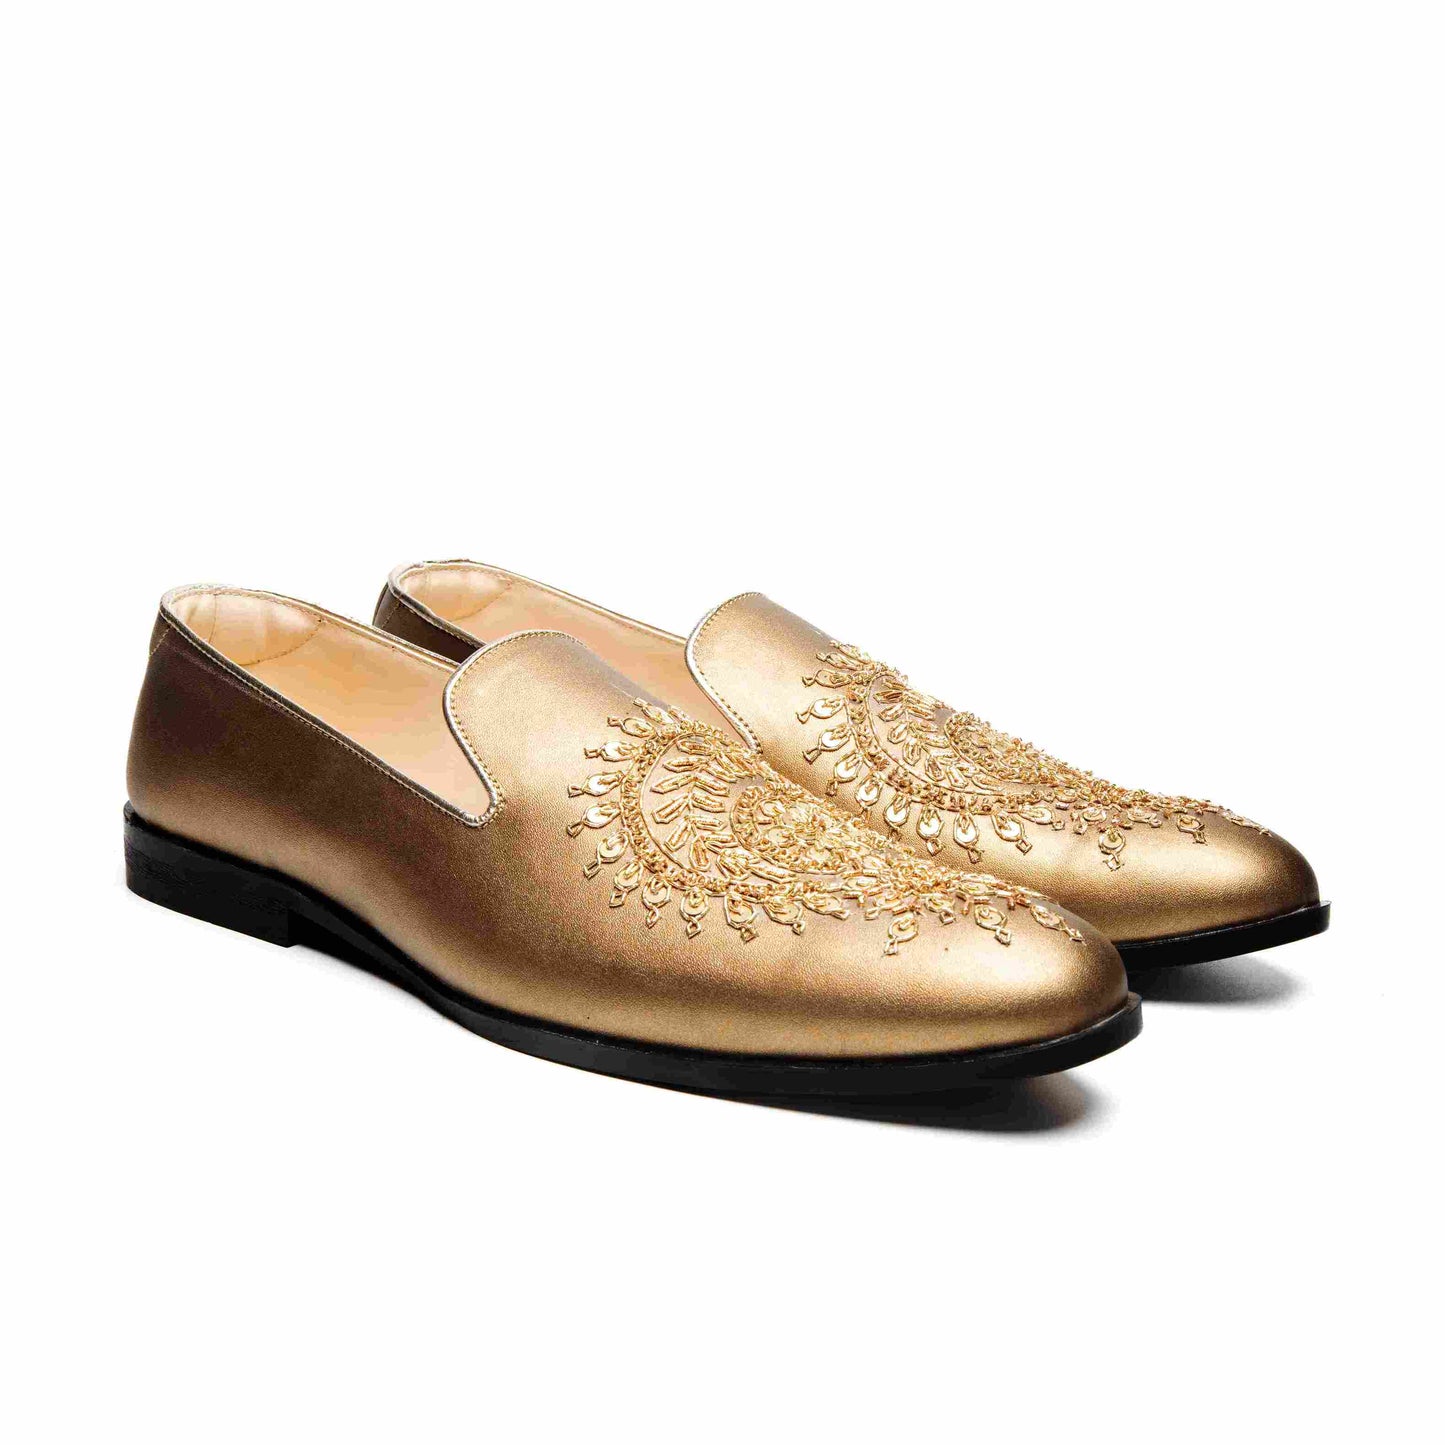 Antique Gold Faux Leather Embroidered Moccasin Shoes